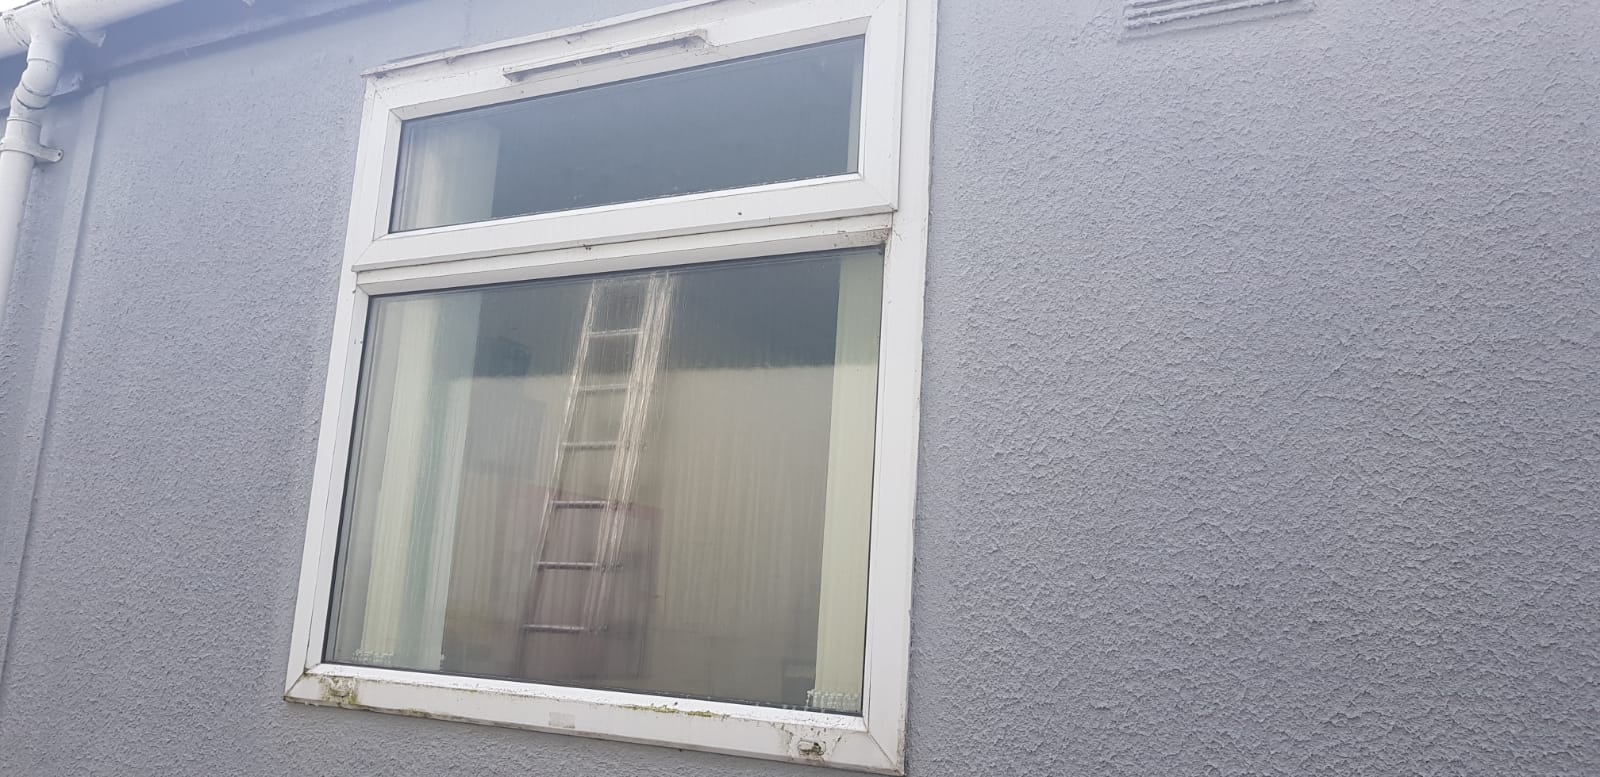 window frame cleaning before